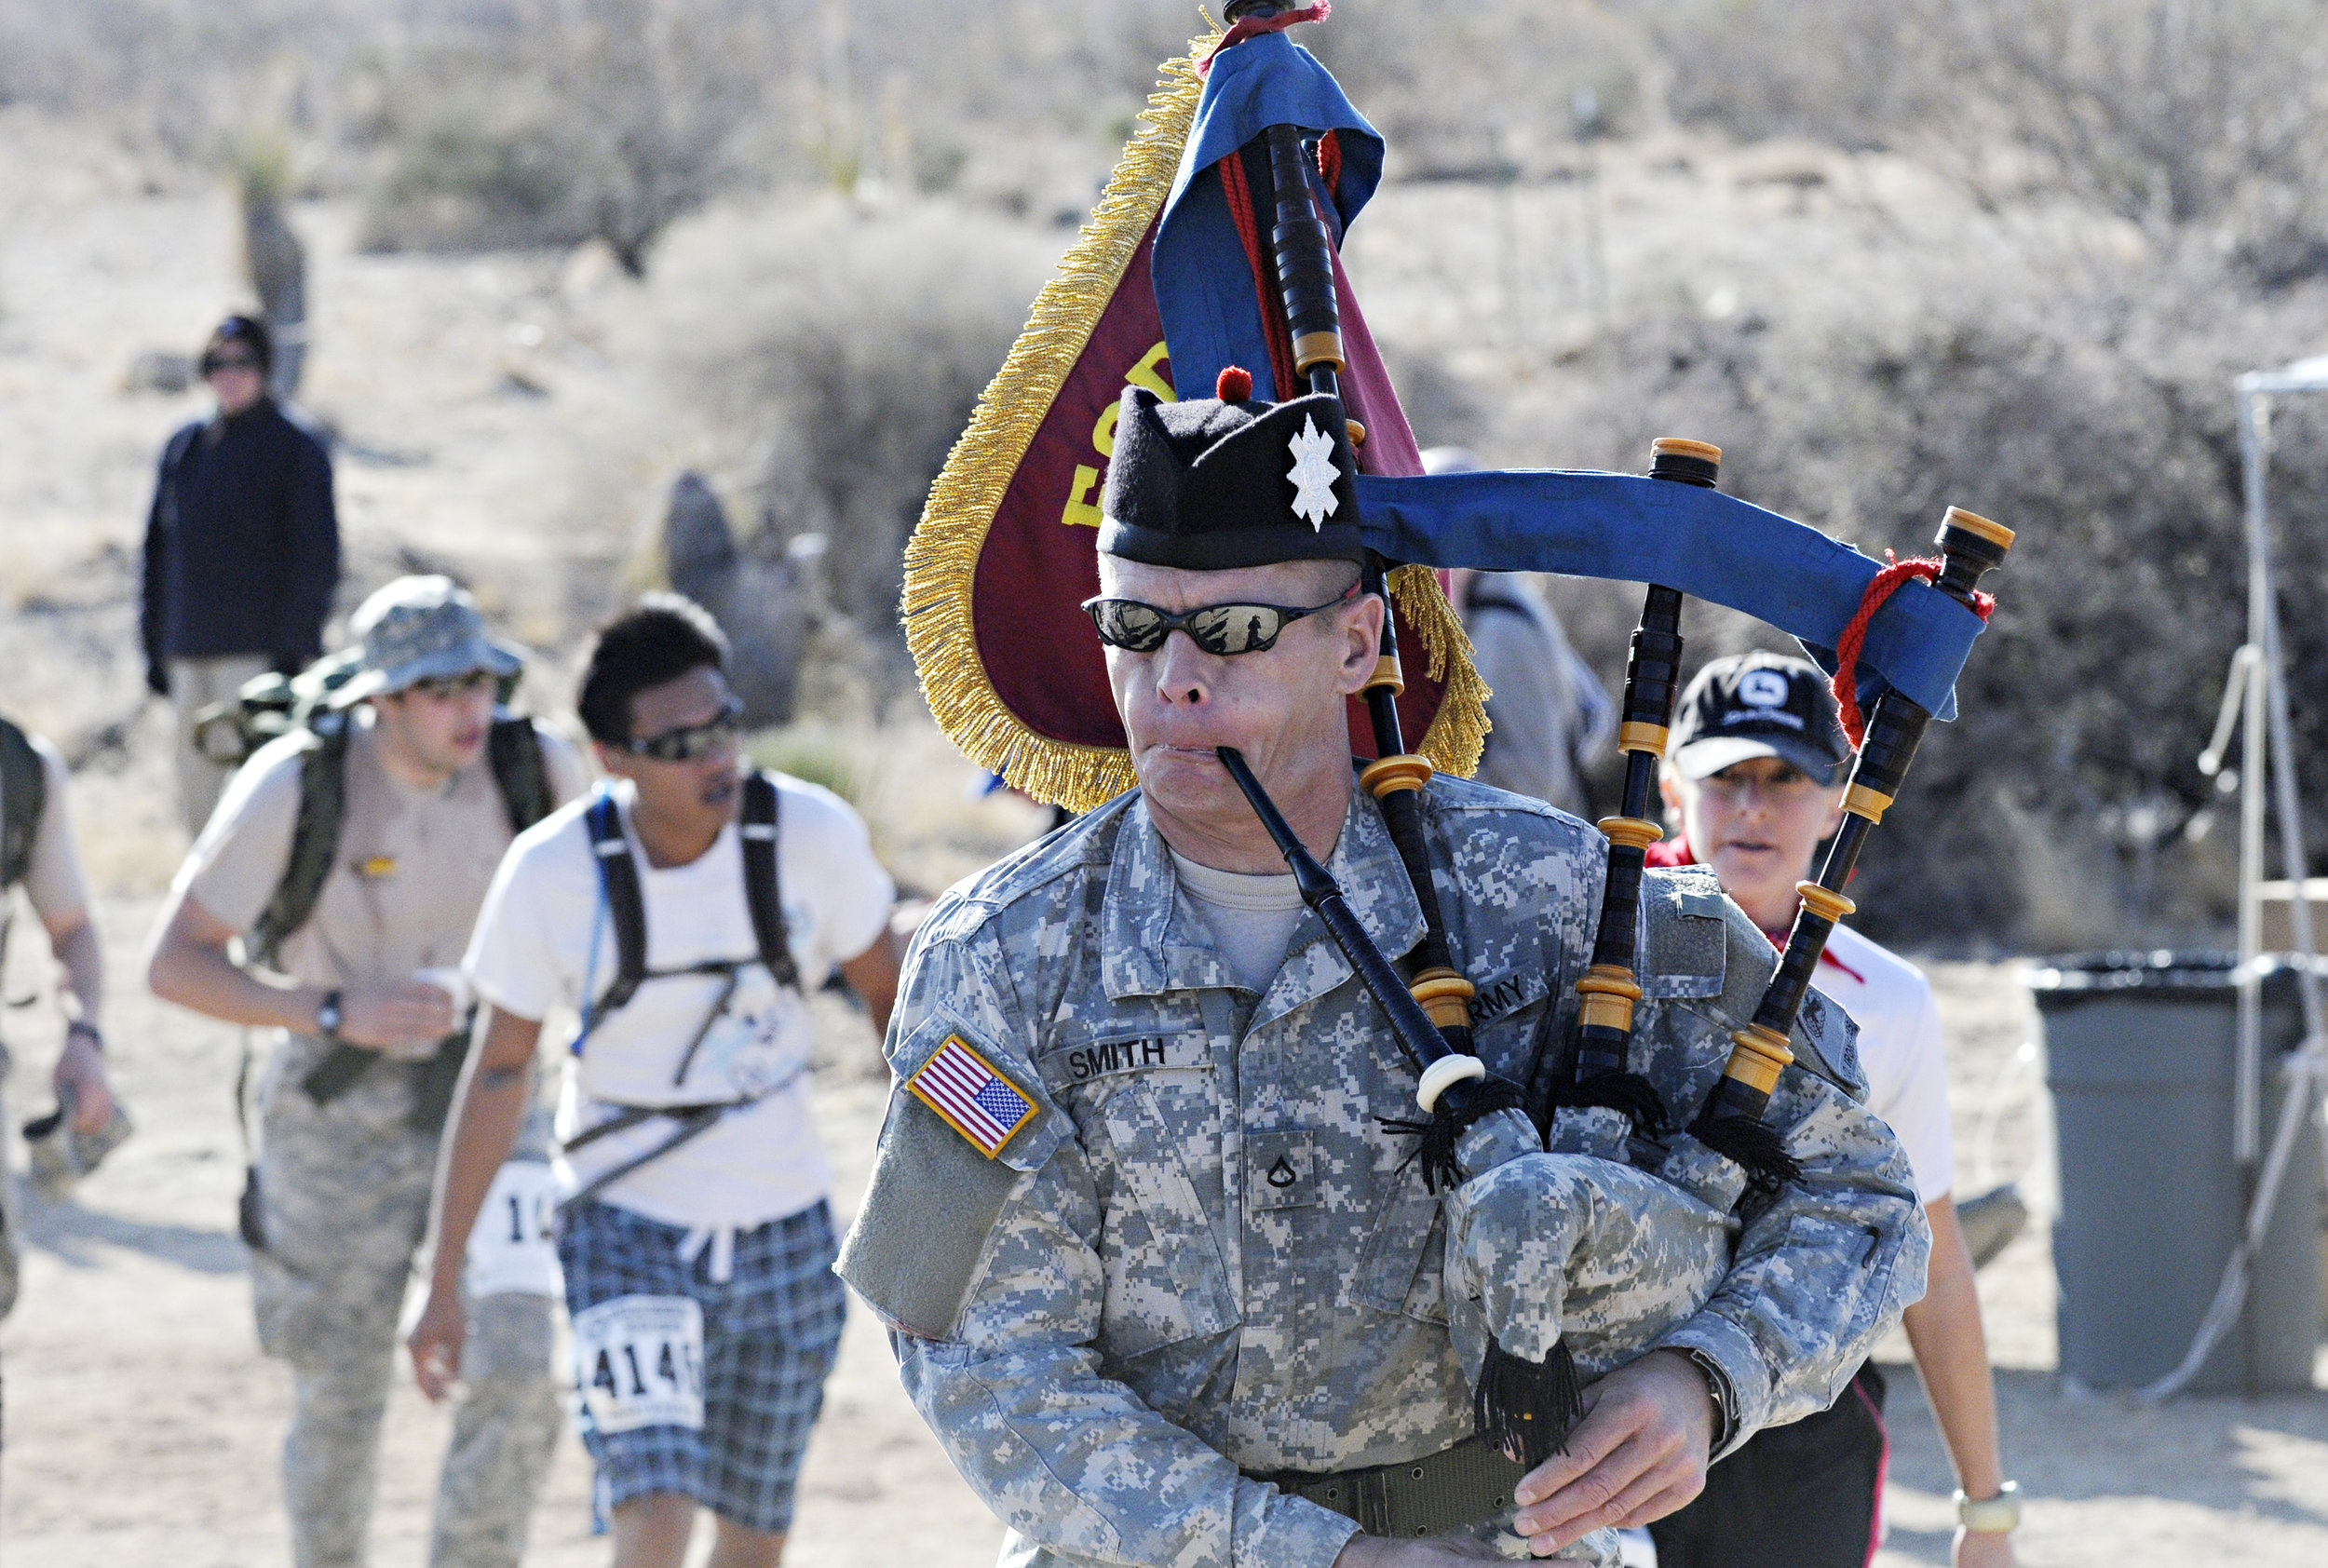  Angus Smith plays the bagpipes while marching in the 22nd Annual Bataan Memorial Death March at White Sands Missile Range, Sunday, March 27, 2011. (Morgan Petroski/Albuquerque Journal) 